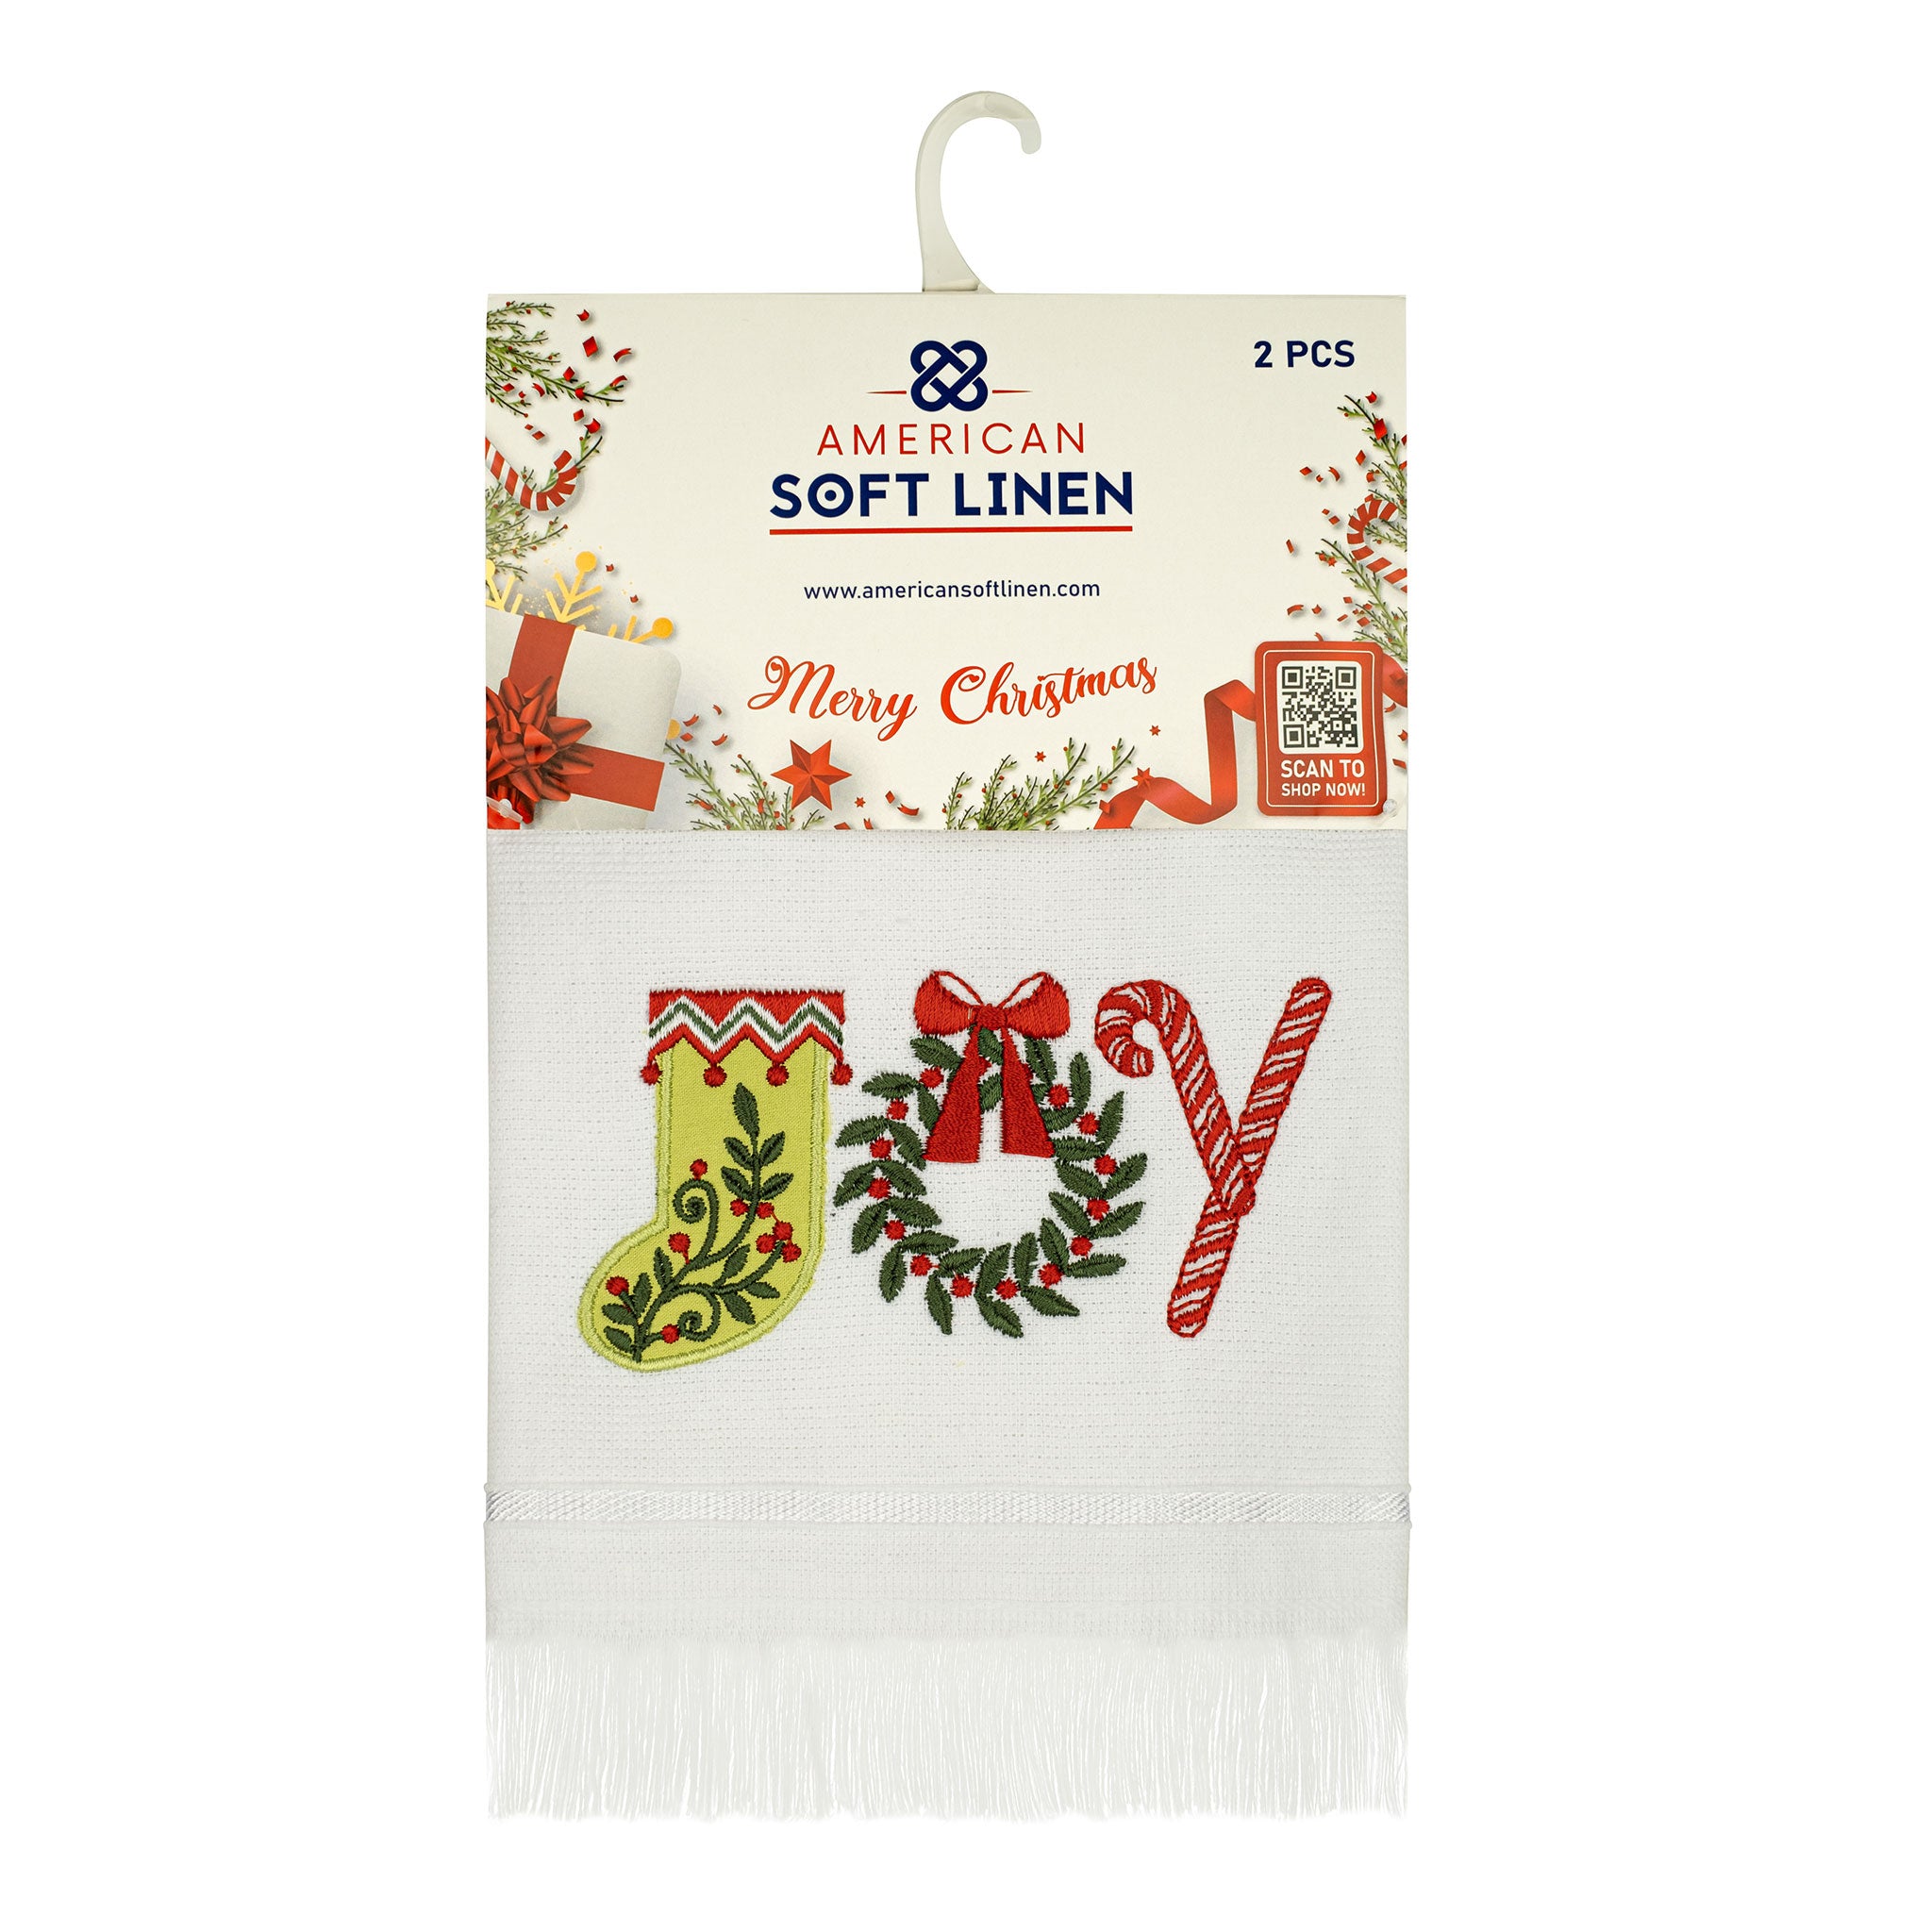  American Soft Linen - Christmas Towels Set 2 Packed Embroidered Turkish Cotton Hand Towels - Joy Lettering - 8